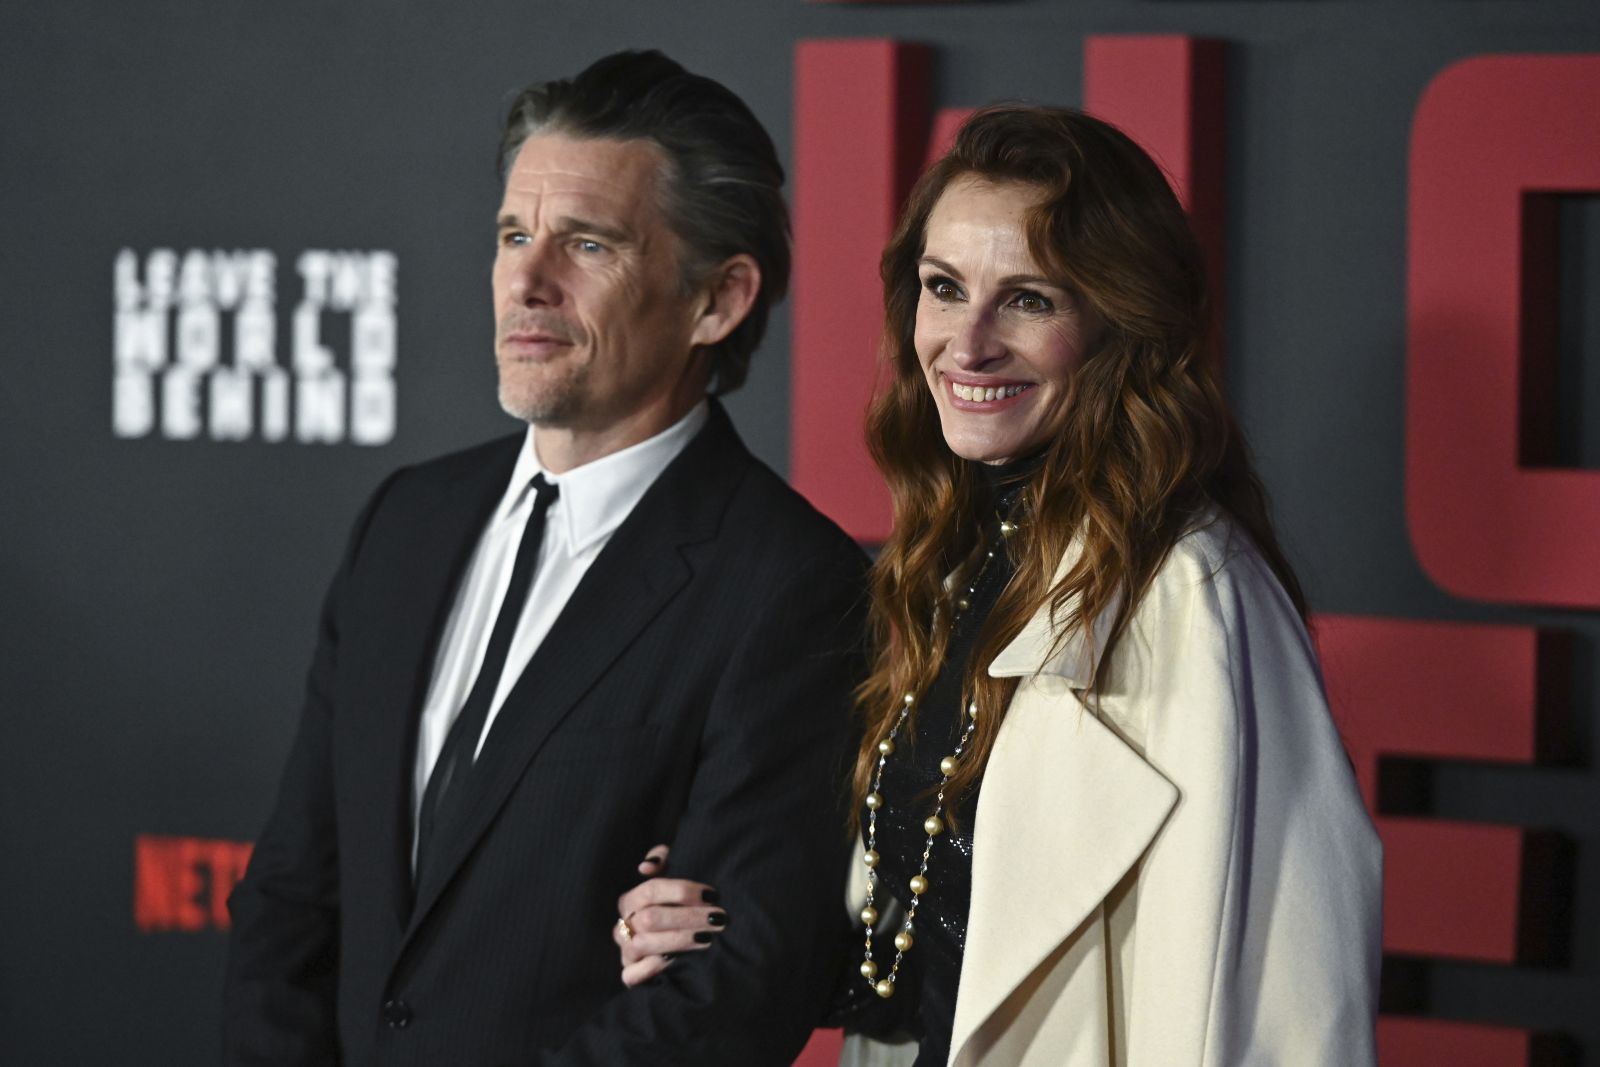 Photo by: NDZ/STAR MAX/IPx 2023 12/4/23 Ethan Hawke and Julia Roberts at the premiere of 'Leave the World Behind' on December 4, 2023 in New York City.